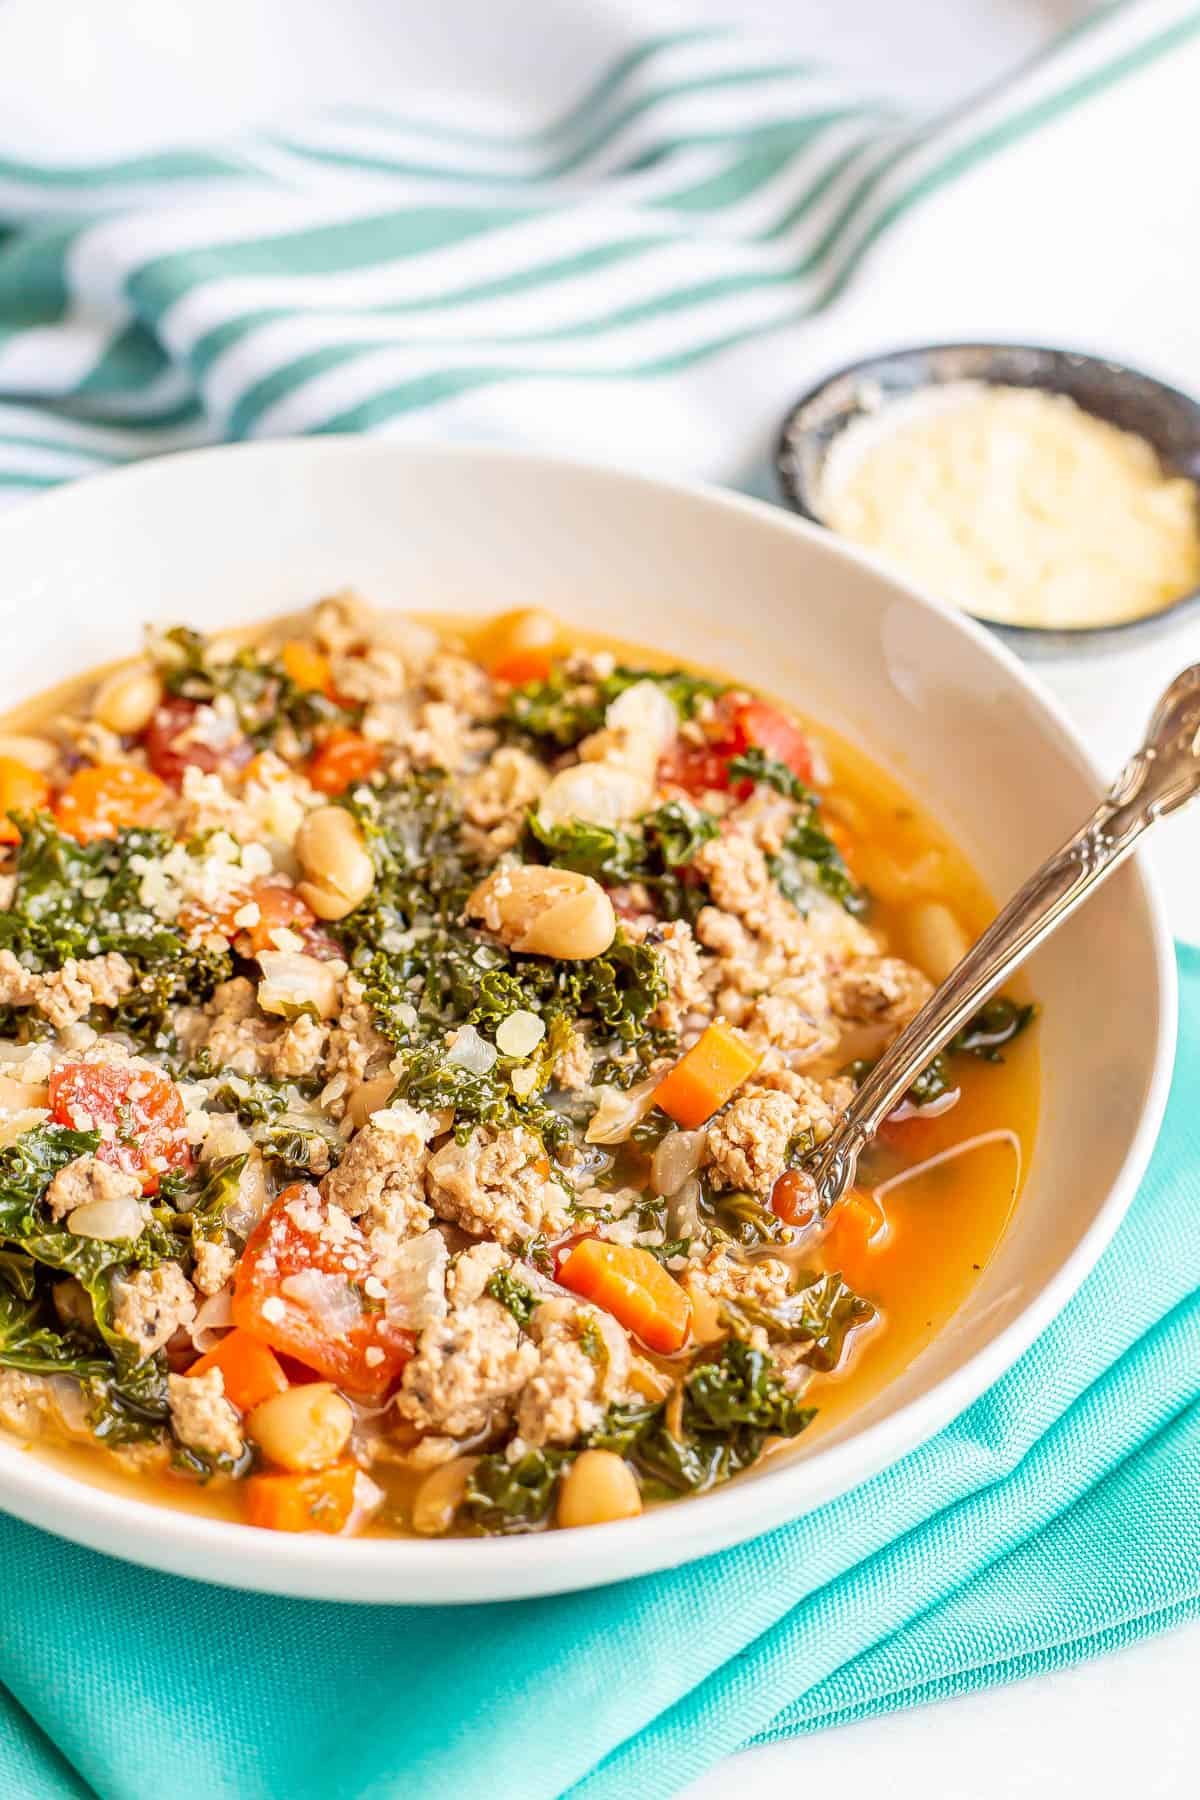 A spoon tucked into a bowl of ground turkey soup with kale and white beans.